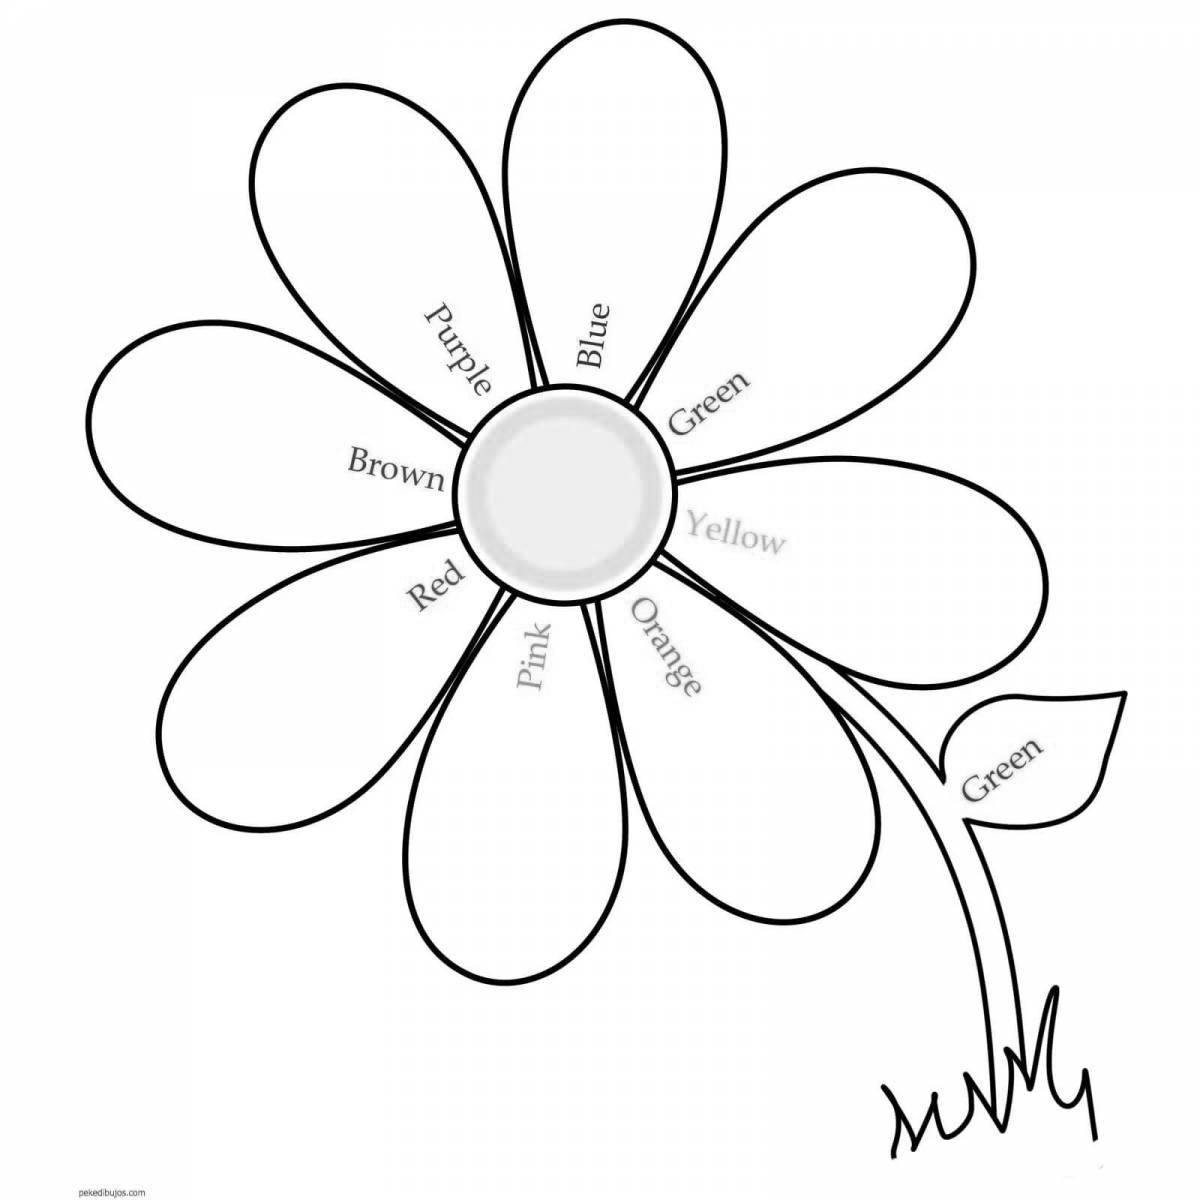 Incredible coloring flower template with seven colors